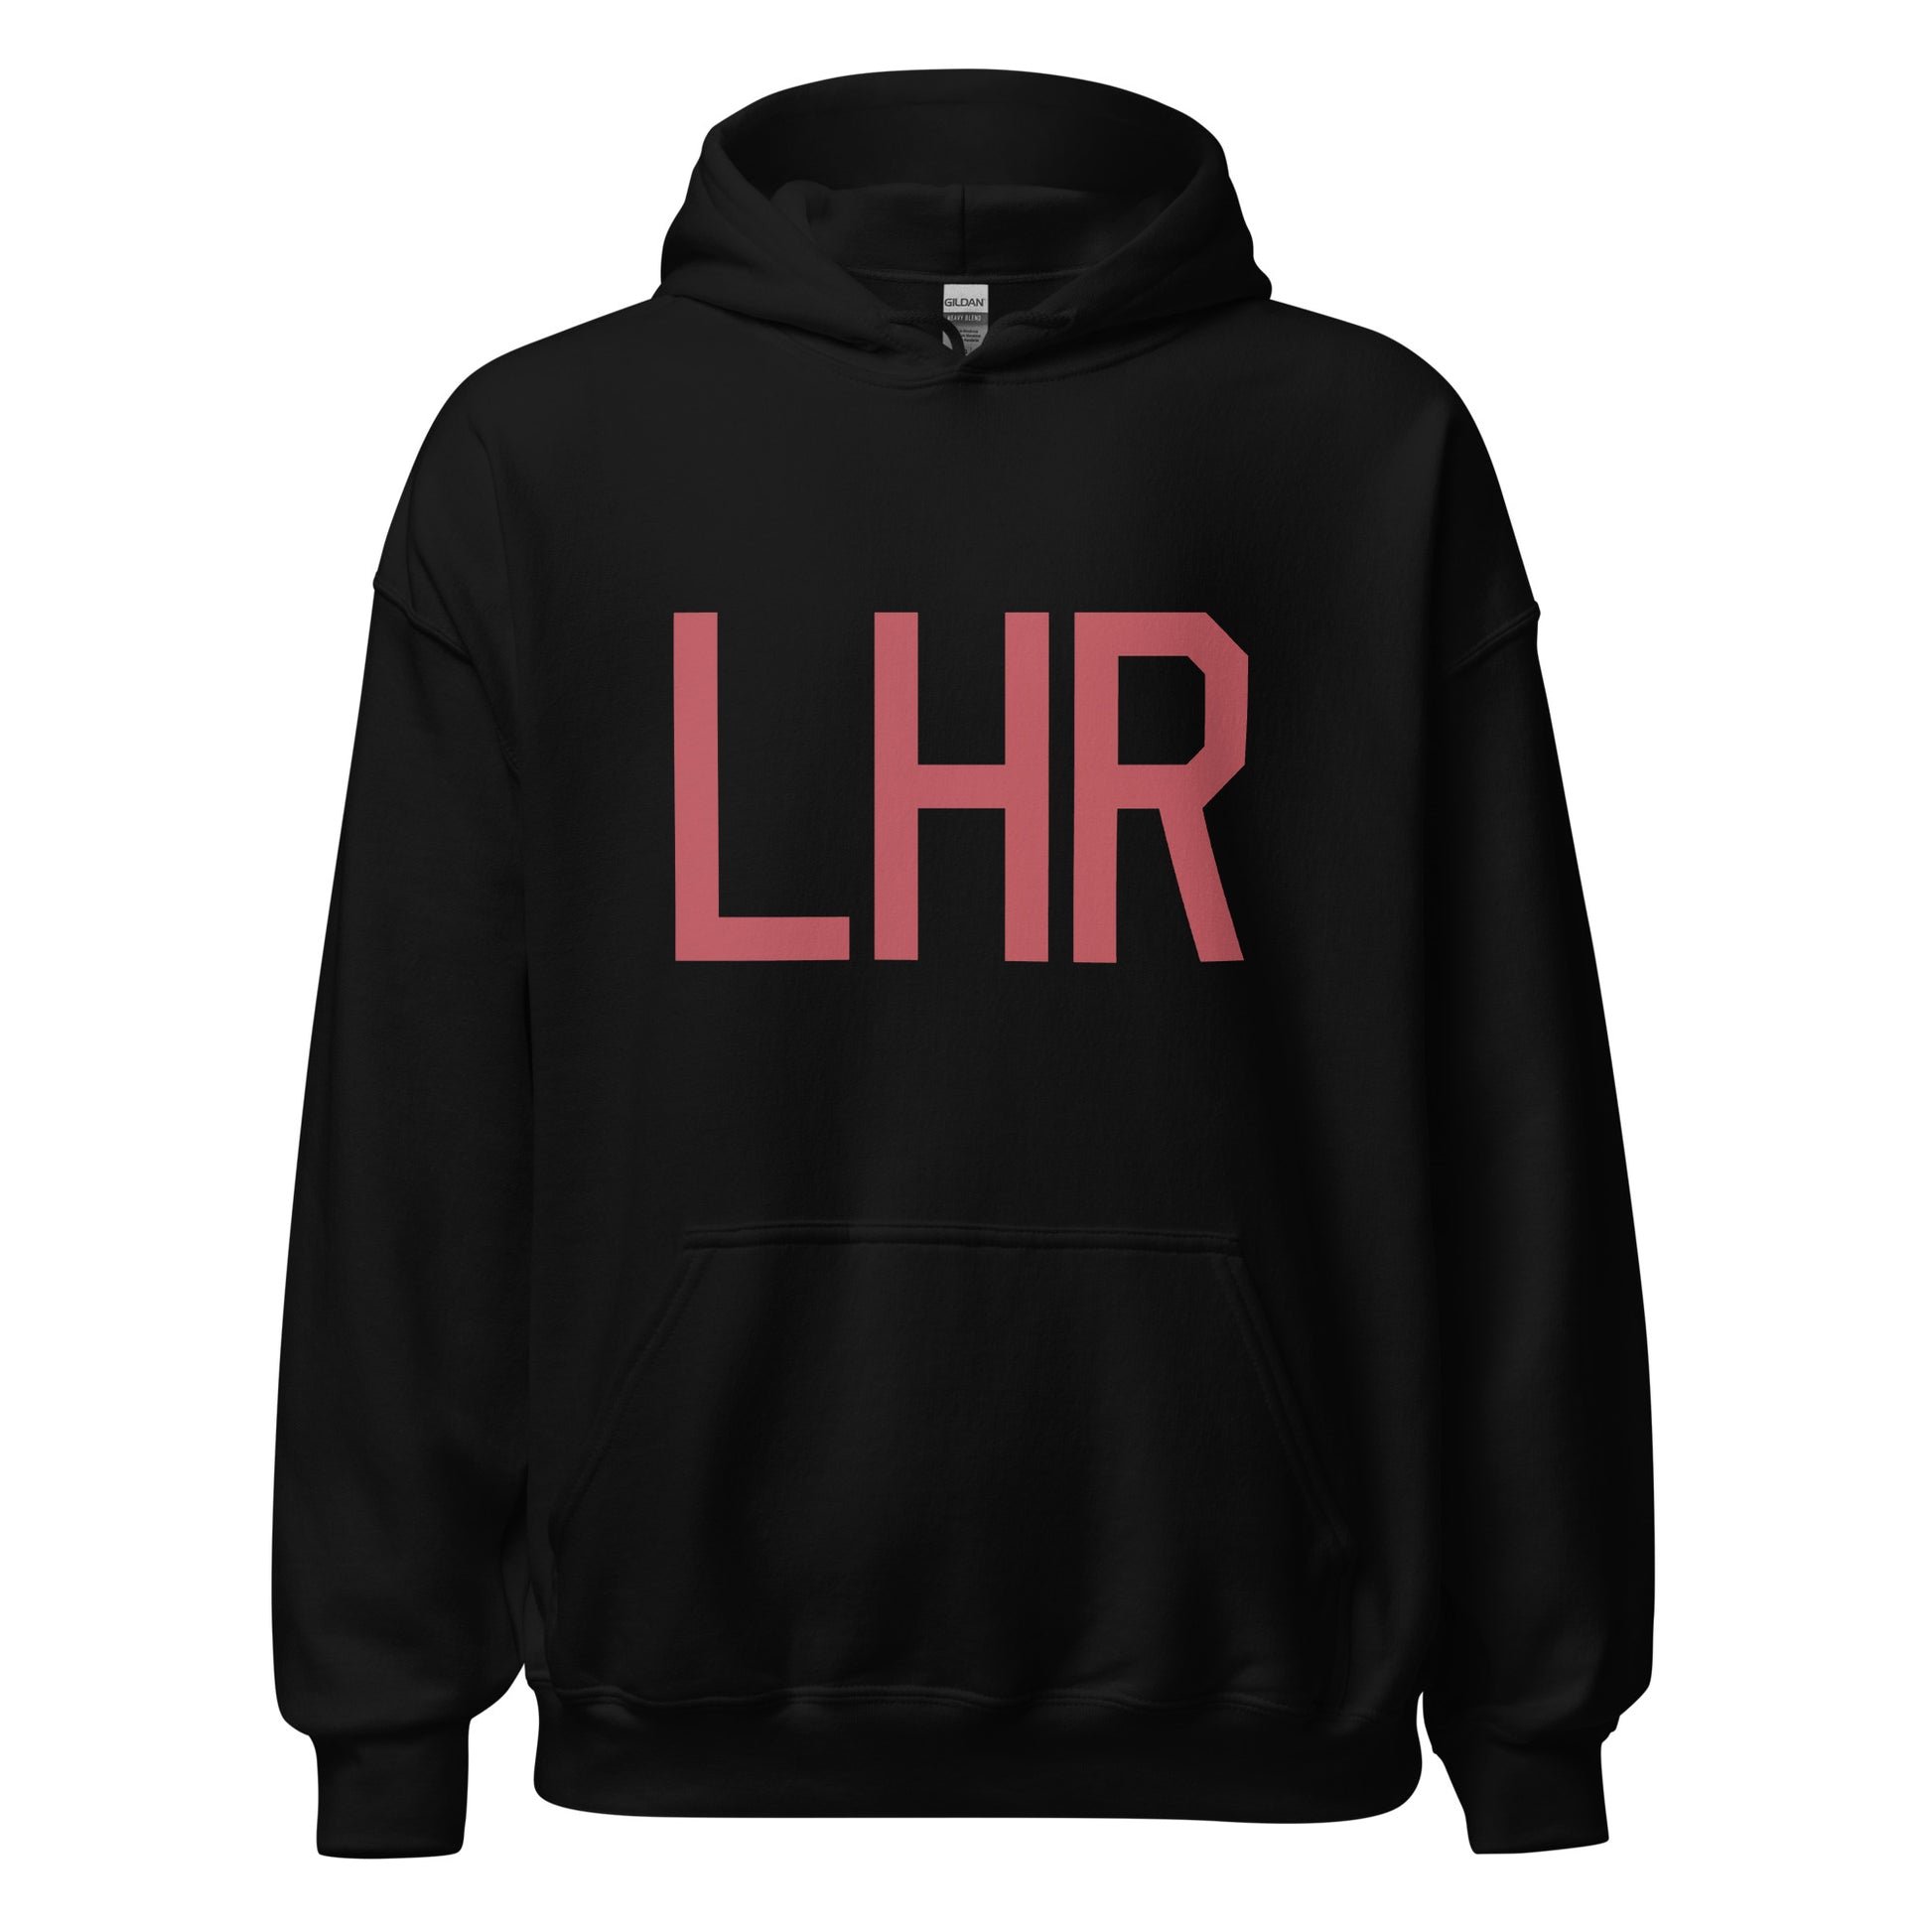 Aviation Enthusiast Hoodie - Deep Pink Graphic • LHR London • YHM Designs - Image 03